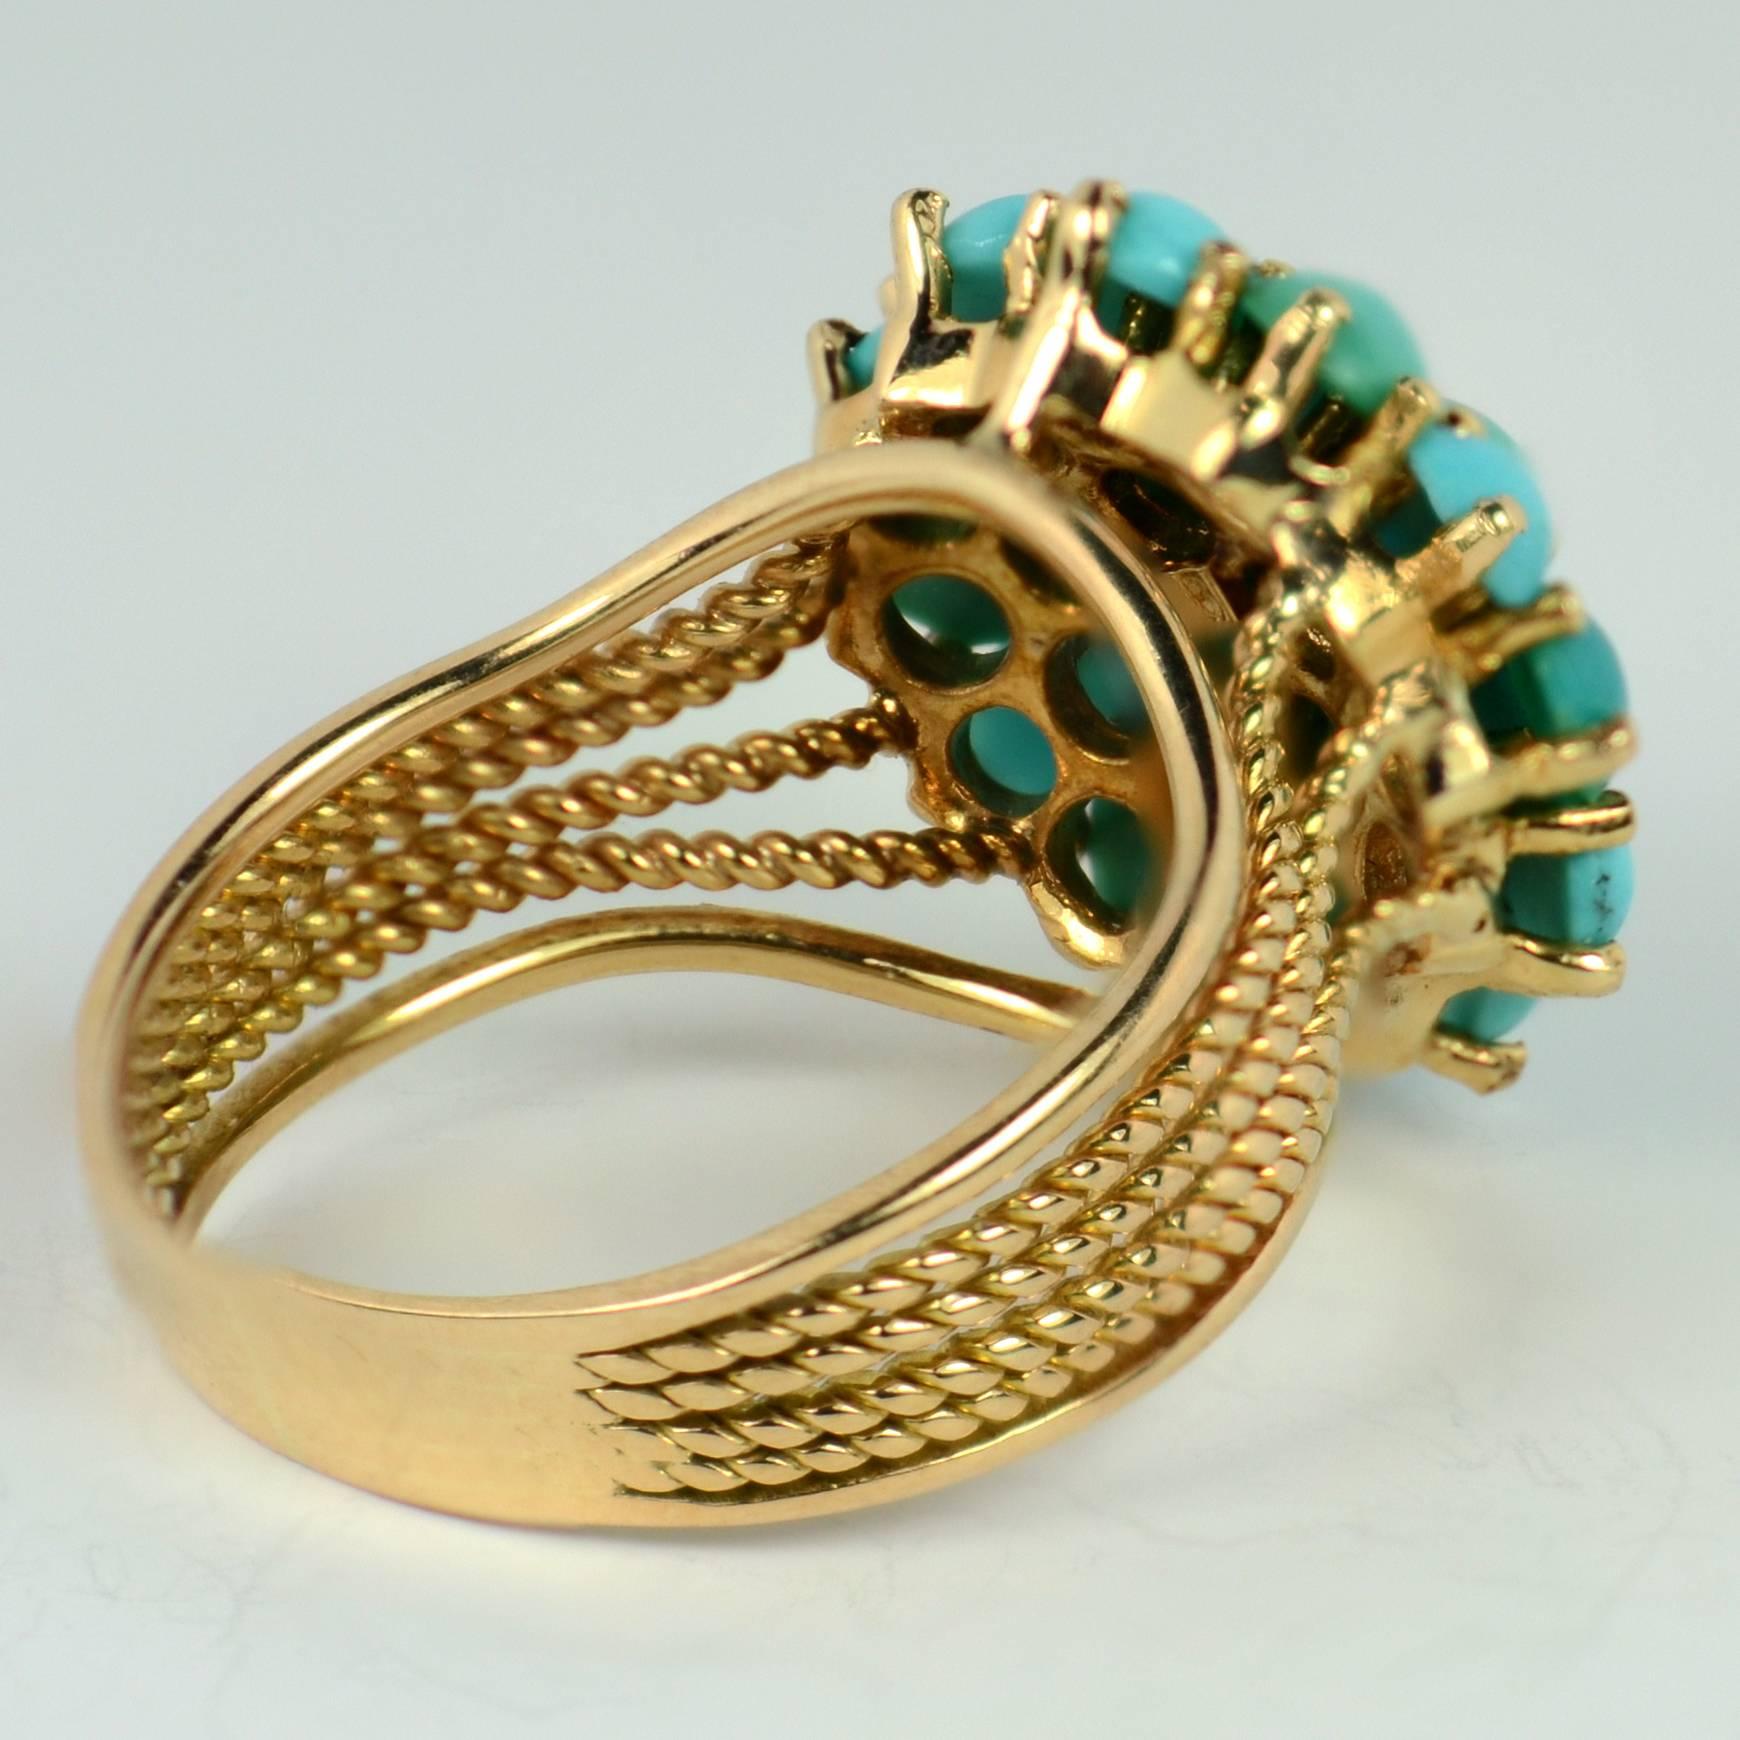 A simple and attractive 18 karat gold ring set with 19 cabochon turquoise to a smooth dome.  The shank of the ring has twisted and smooth gold wires to give textural interest.

Marked K18 for 18 karat gold.

Ring size 8 (US), P.5 (UK).